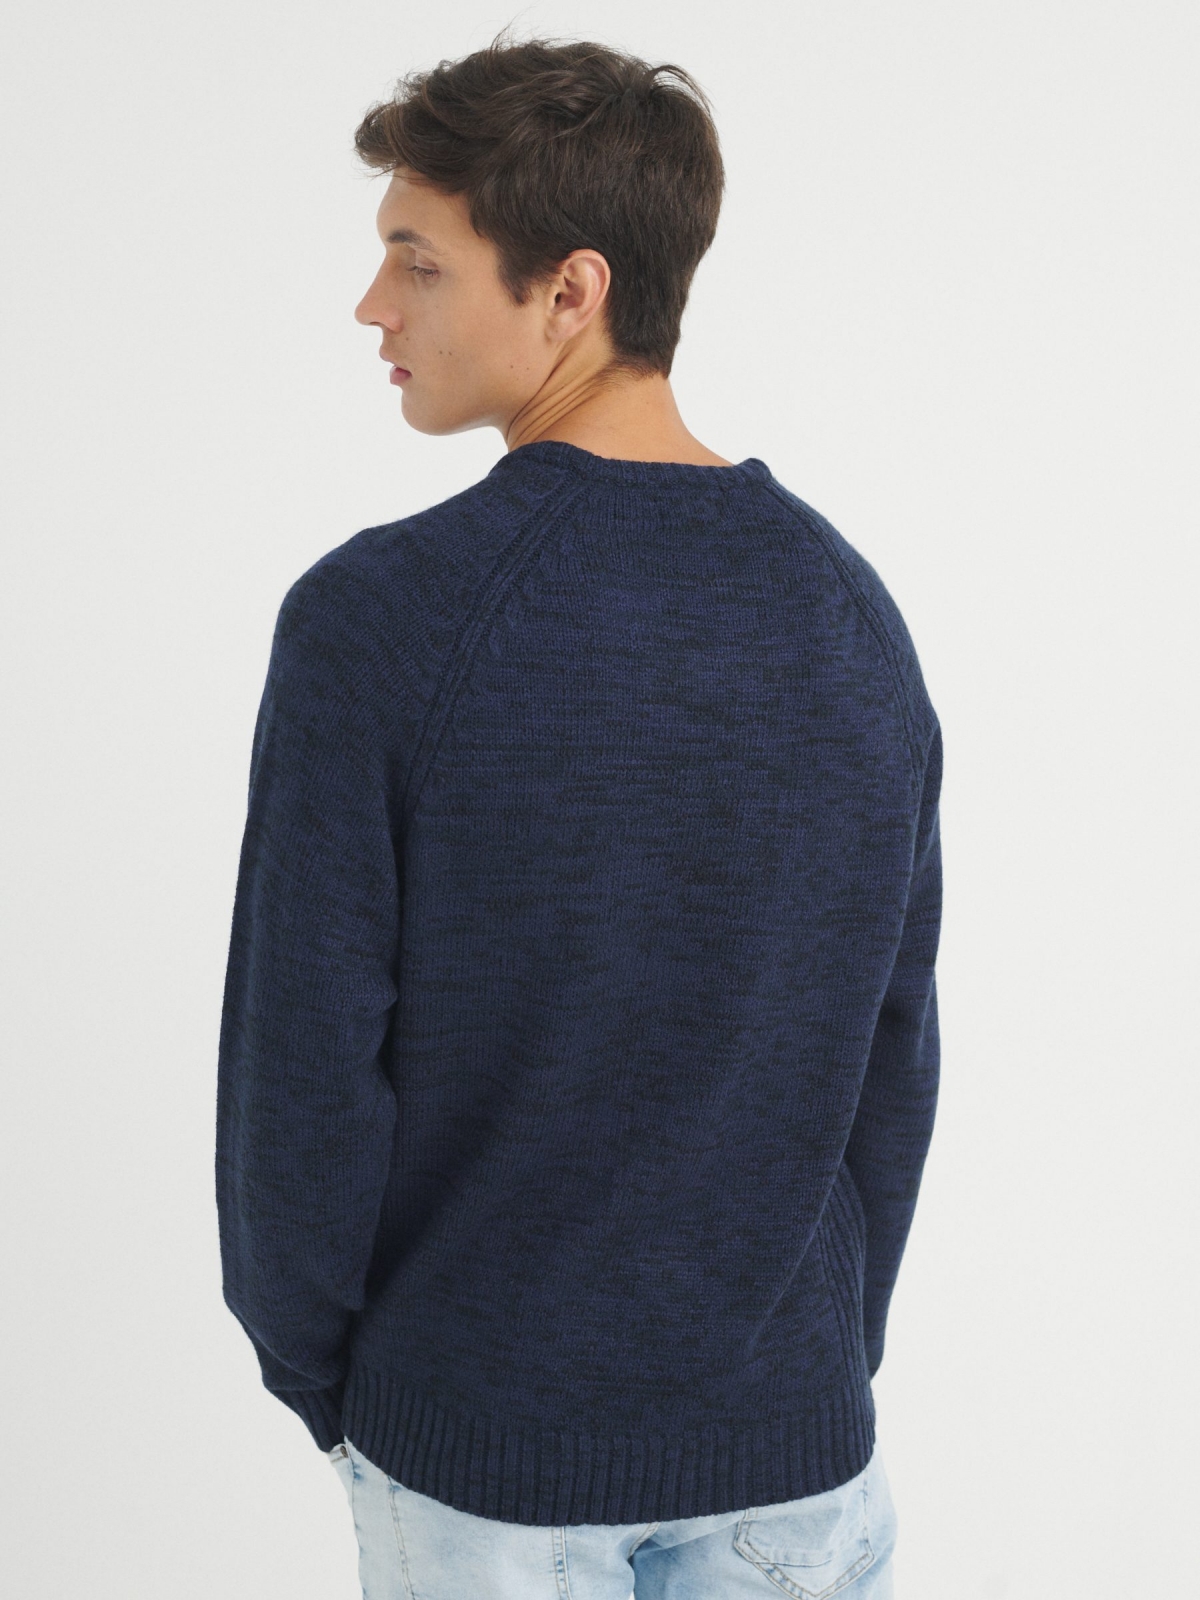 Marbled knitted sweater blue middle back view